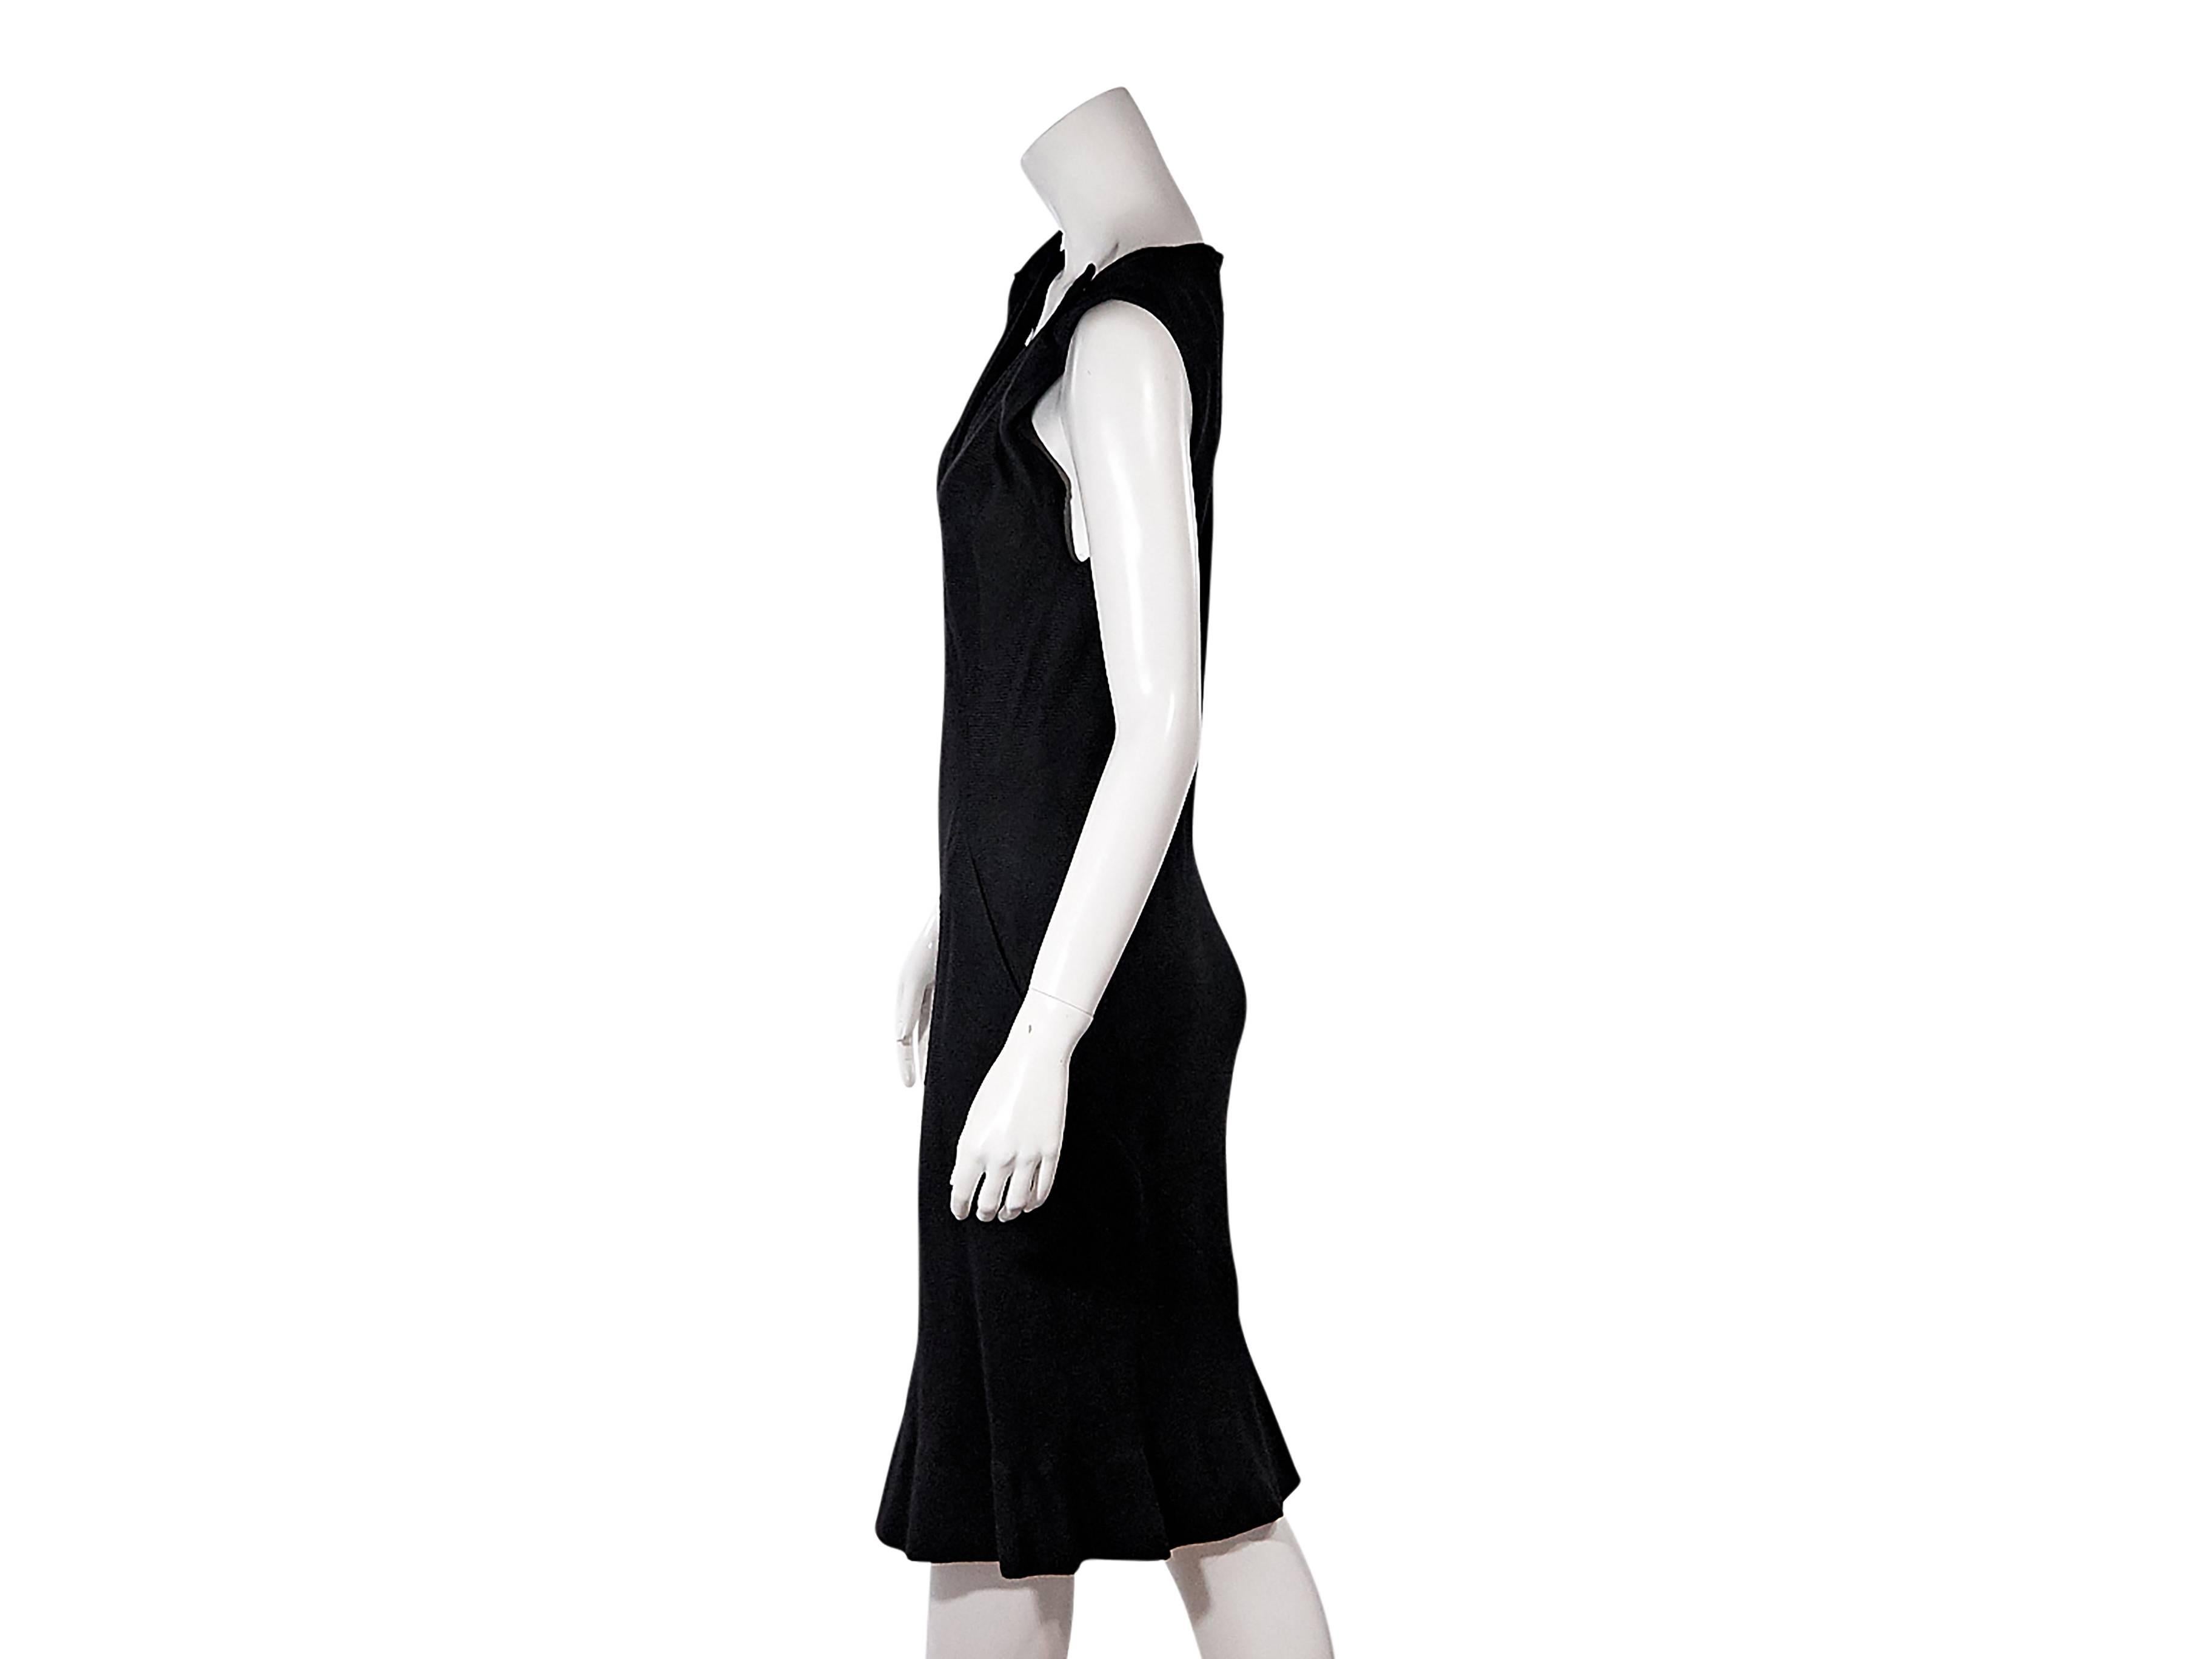 Product details:  Black knit sheath dress by Balenciaga.  Deep v-neck.  Sleeveless.  Pullover style.  Subtle ruffle hem. Size 8
Condition: Pre-owned. New with tags.

Est. Retail $ 1,498.00
